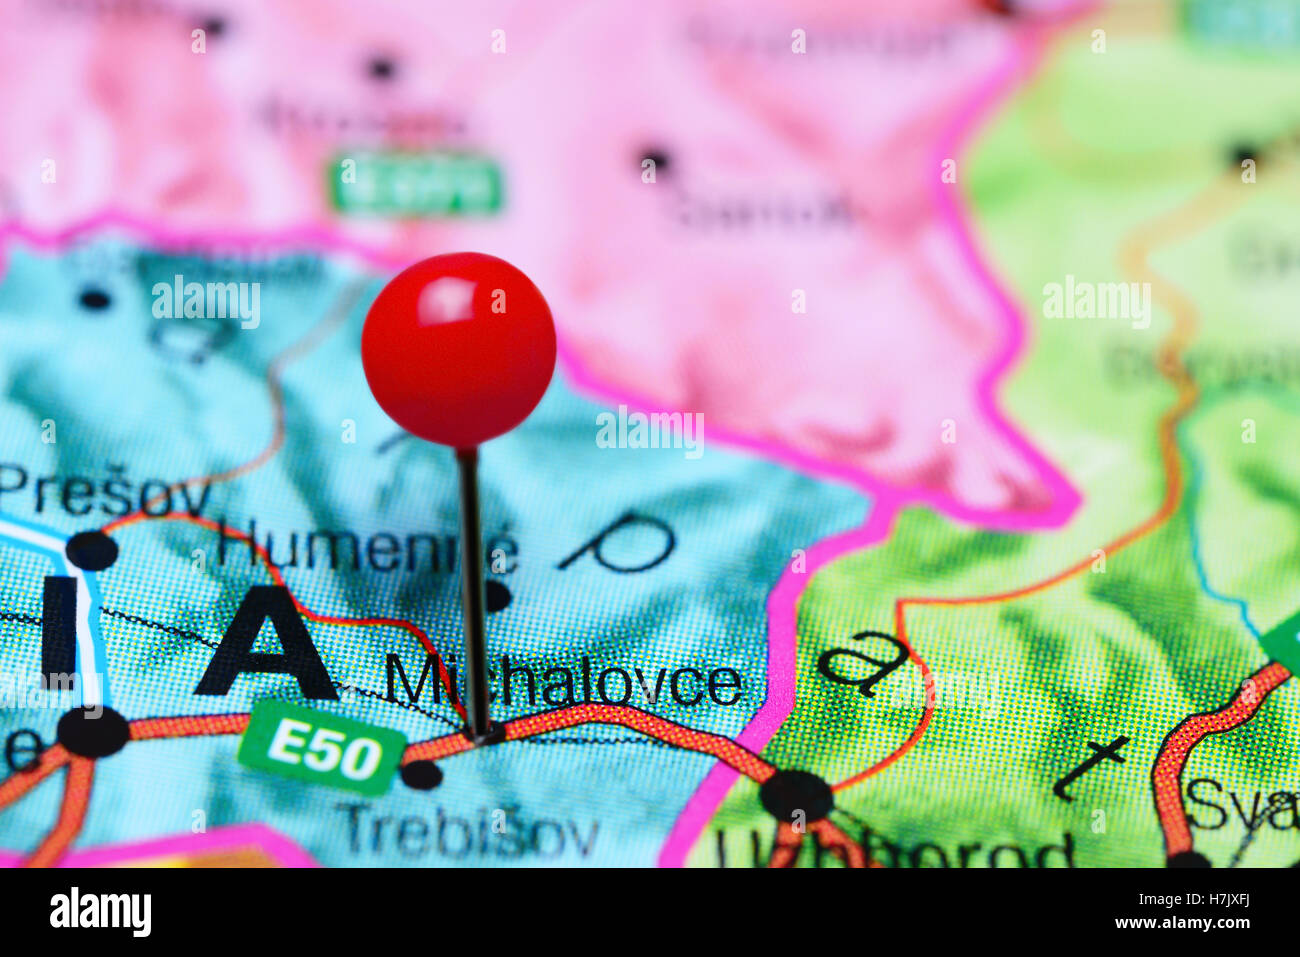 Michalovce pinned on a map of Slovakia Stock Photo